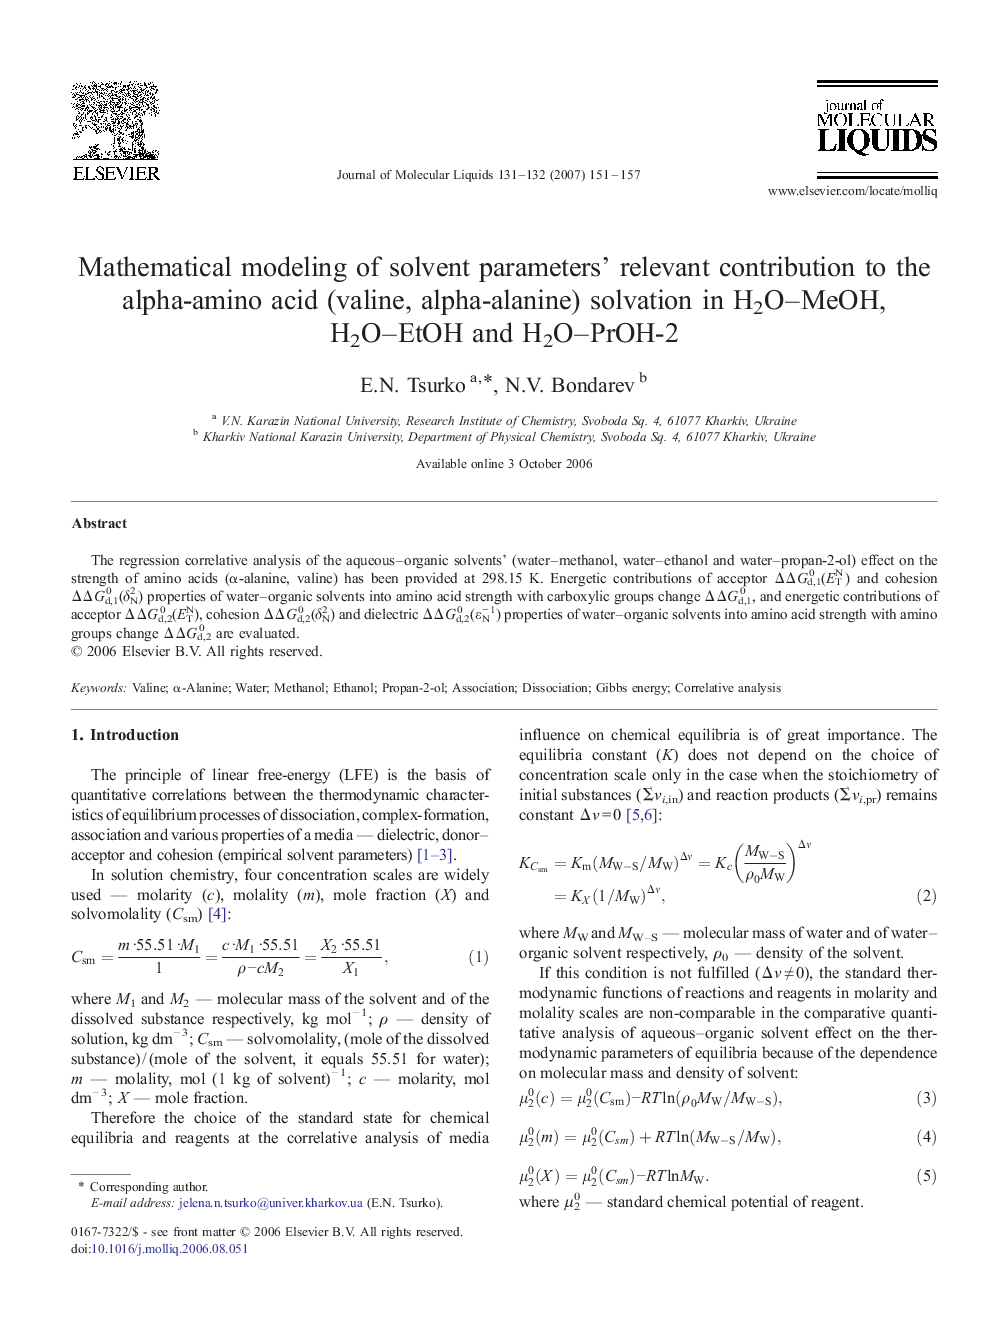 Mathematical modeling of solvent parameters' relevant contribution to the alpha-amino acid (valine, alpha-alanine) solvation in H2O-MeOH, H2O-EtOH and H2O-PrOH-2